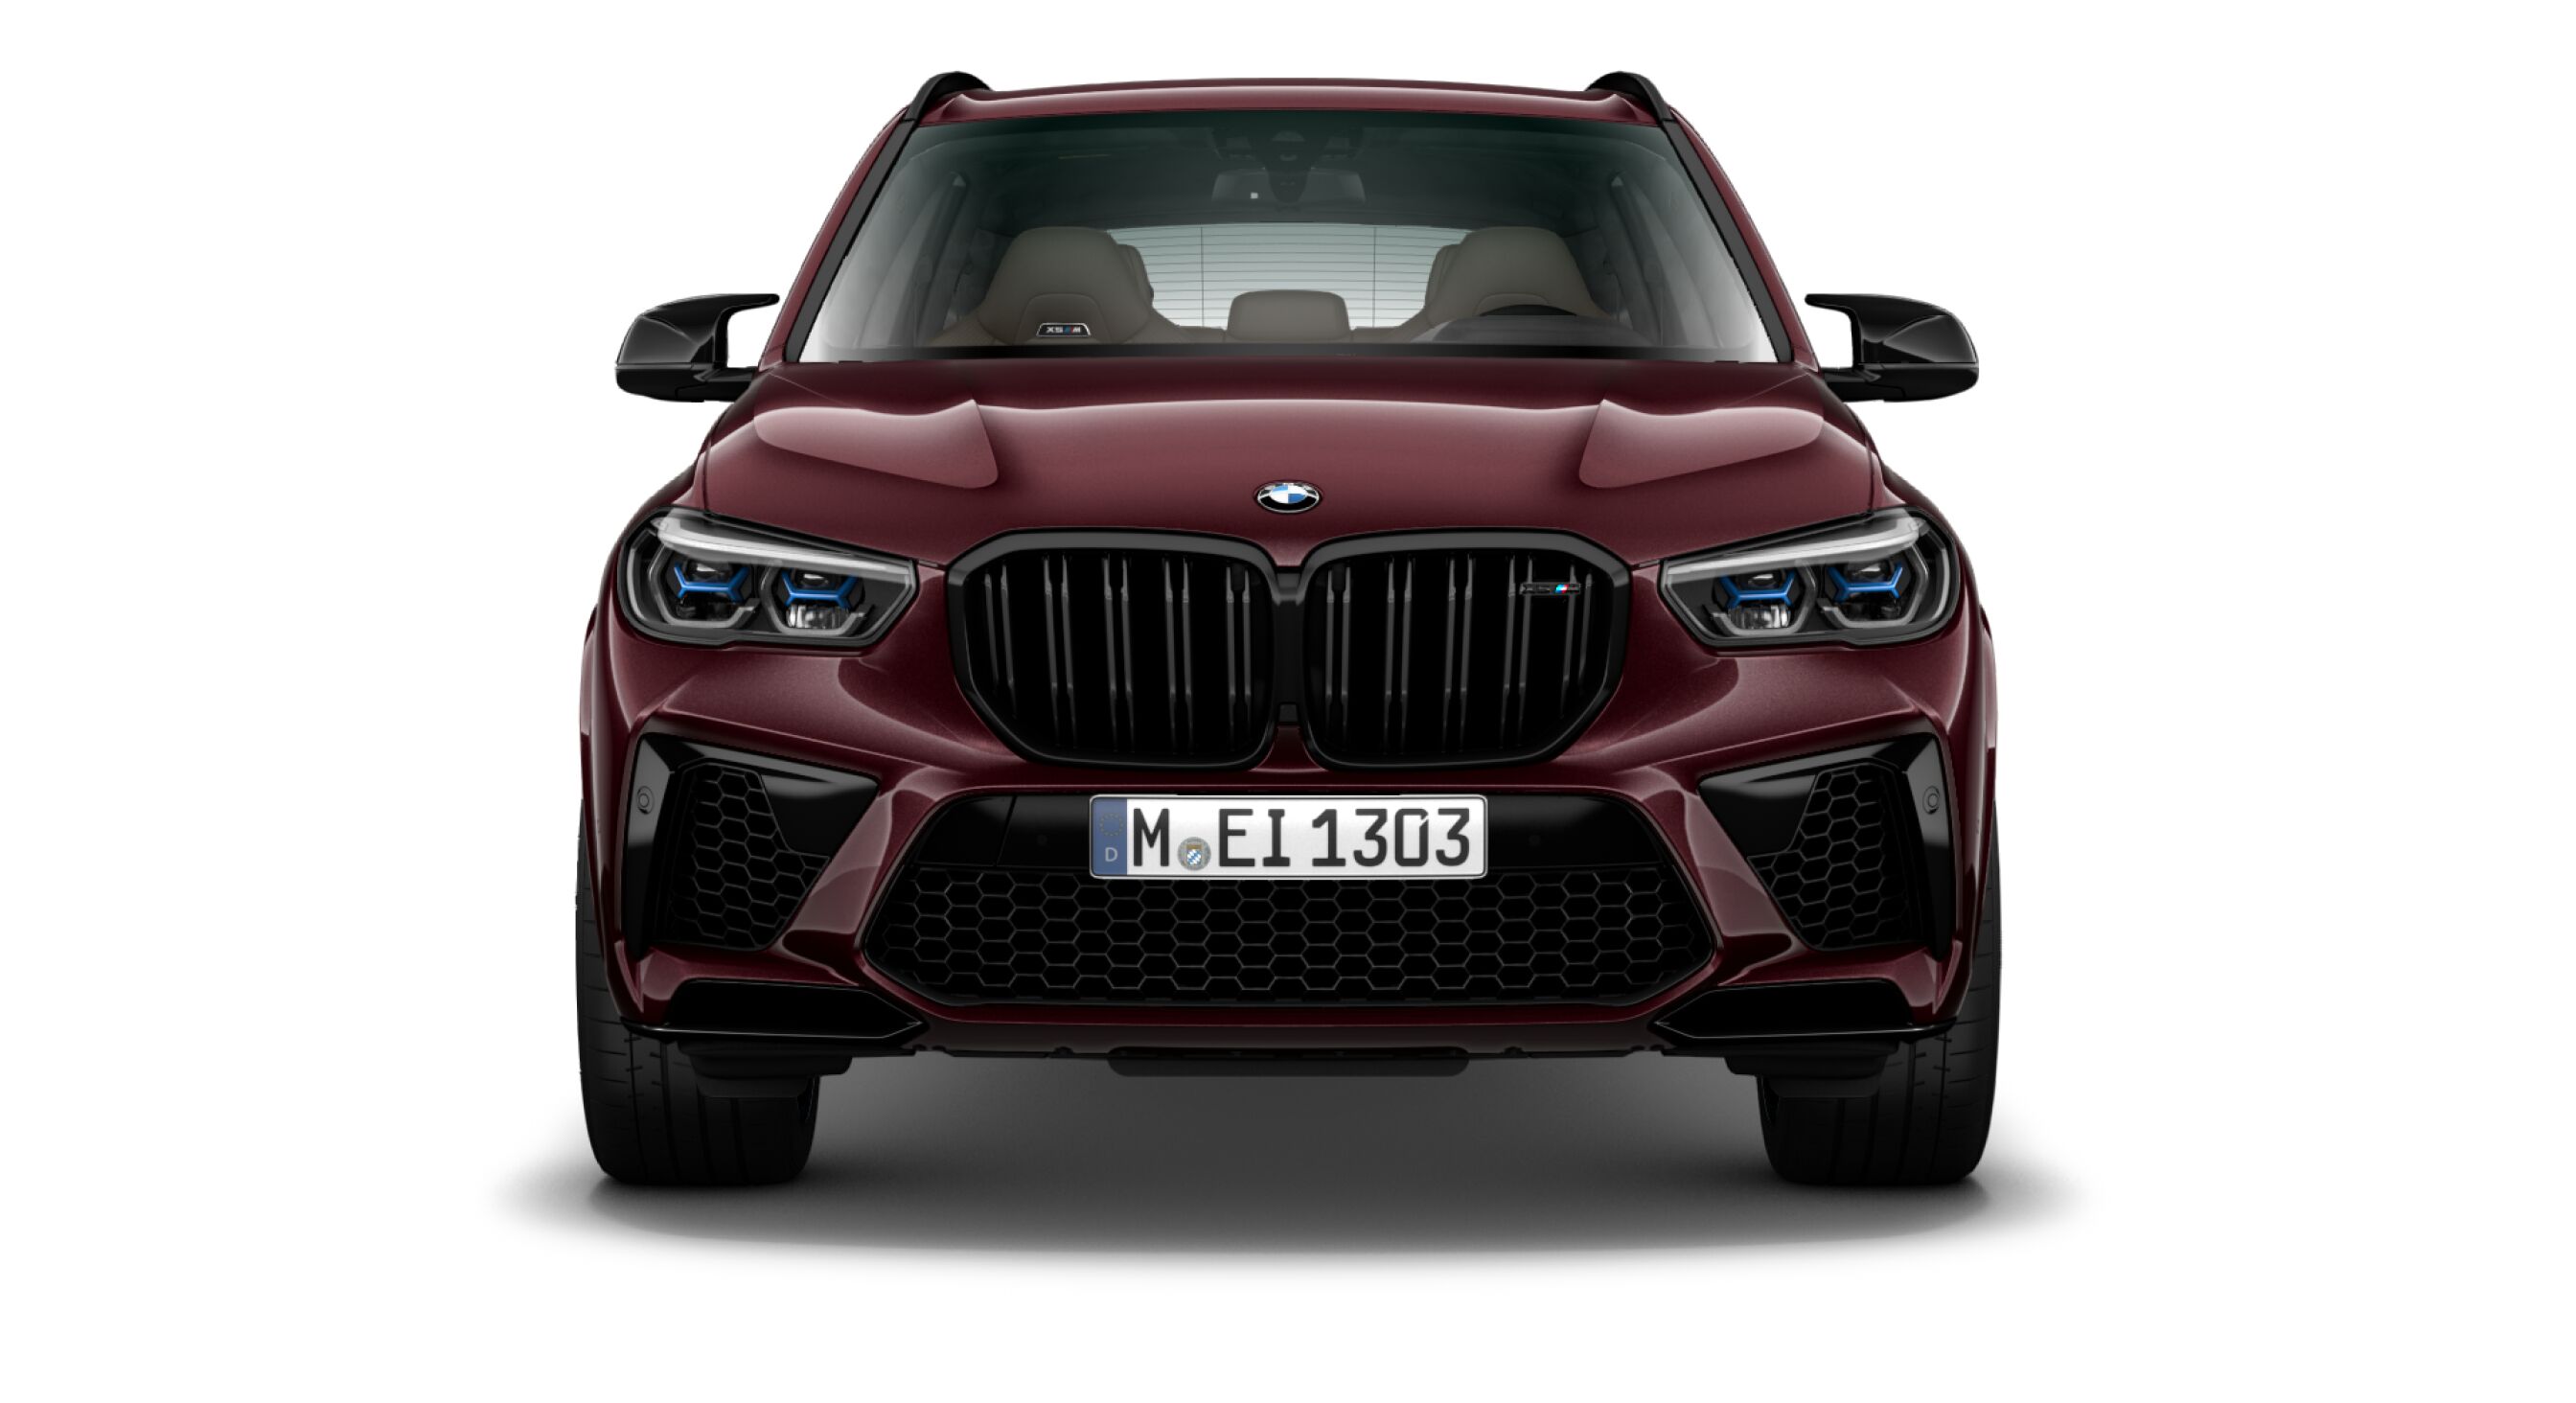 Configurator Now Up Online For New Bmw X5 M And X6 M